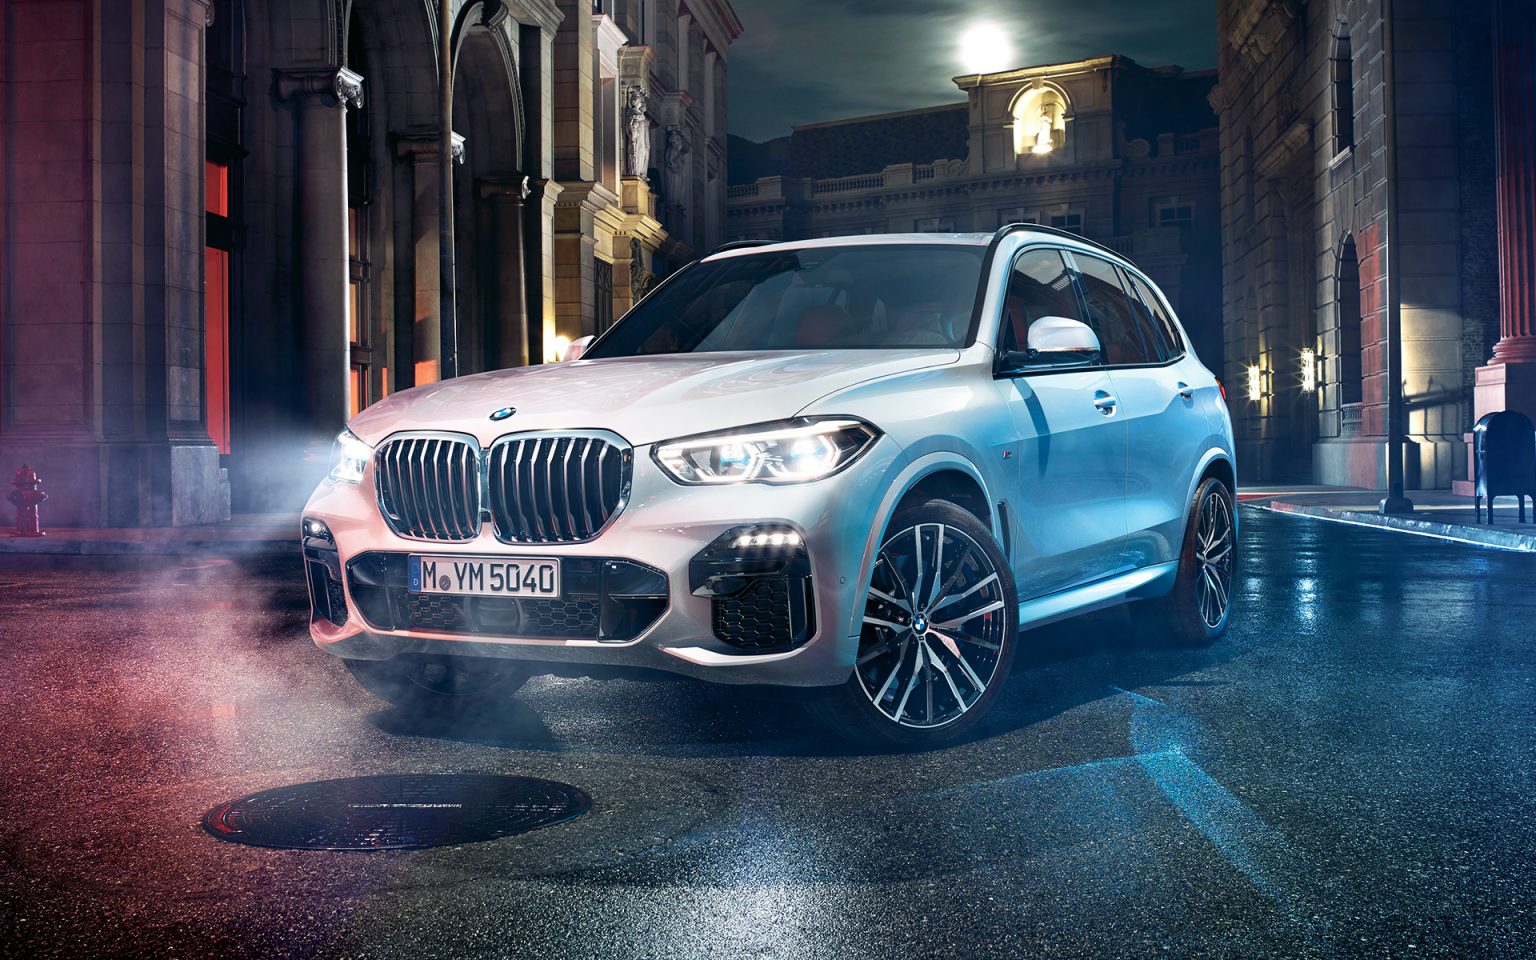 2020 BMW X5 xDrive45e M Sport debuts in Malaysia at RM440,745 after SST